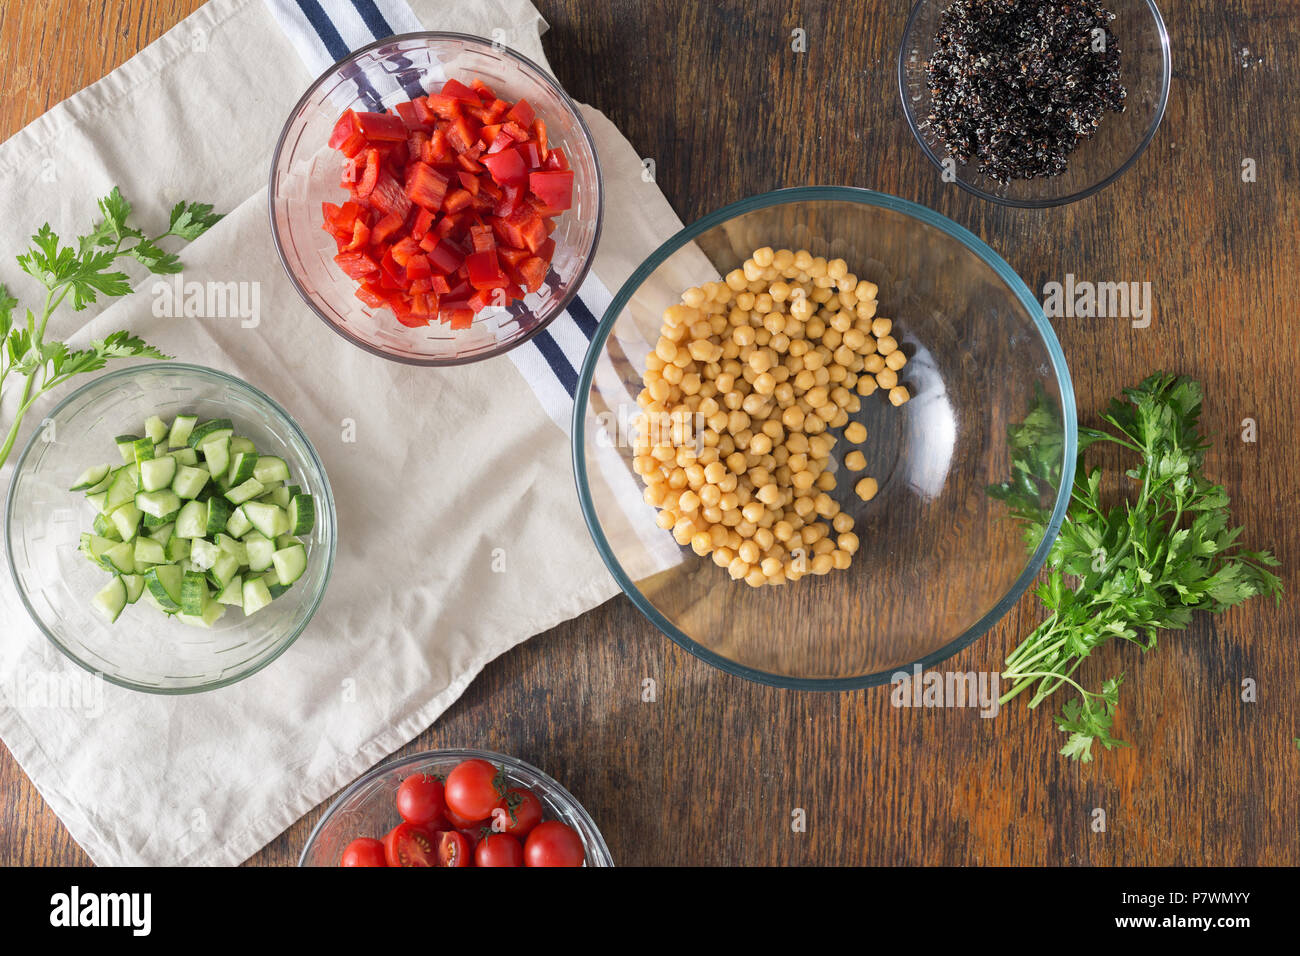 Ingredients for cooking vegetarian healthy salad. Black quinoa, chickpeas, peppers, cucumber, tomatoes and parsley on a wooden table top view Stock Photo